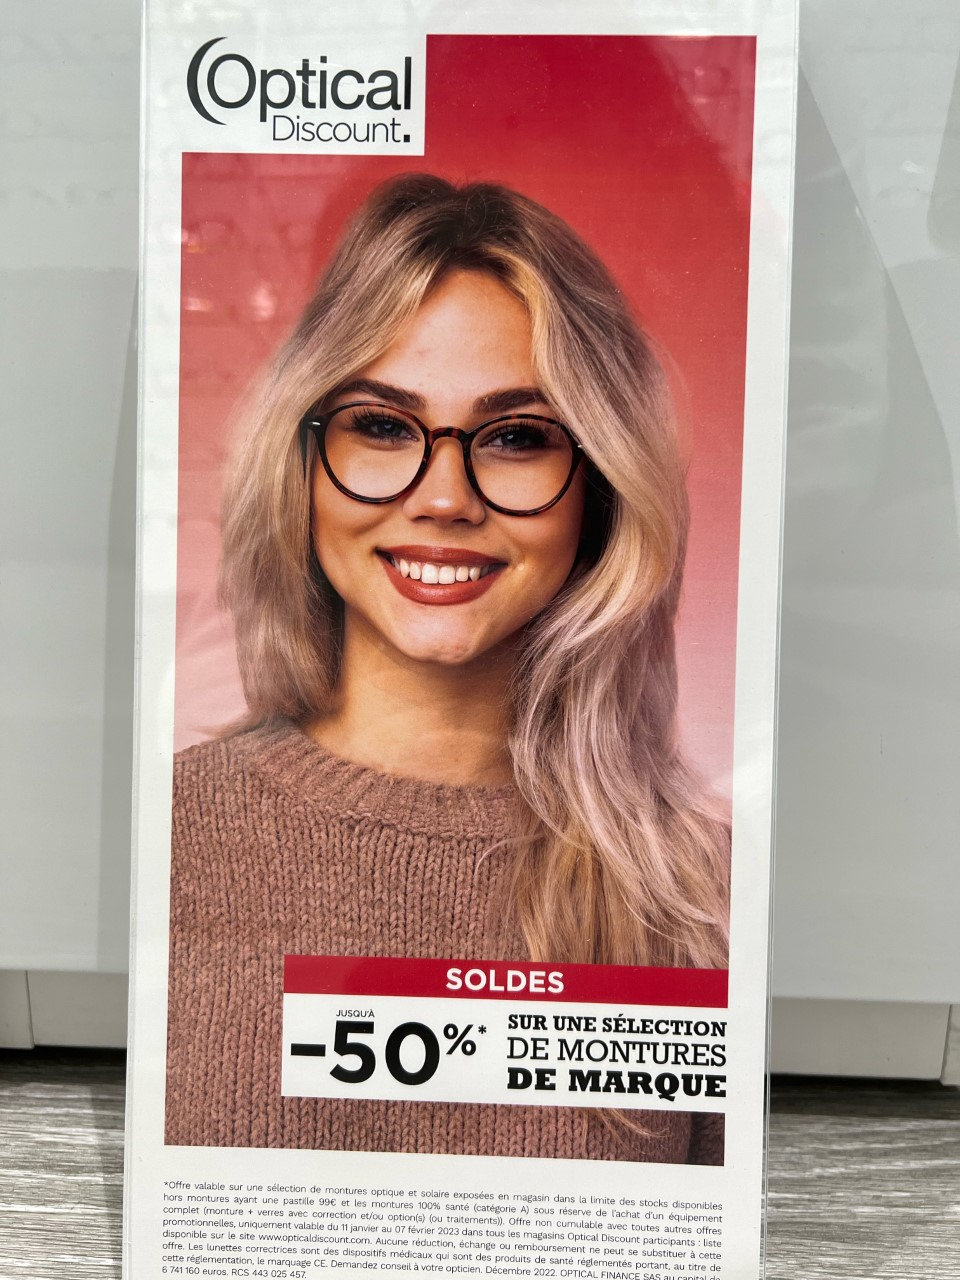 OPTICAL DISCOUNT - SOLDES